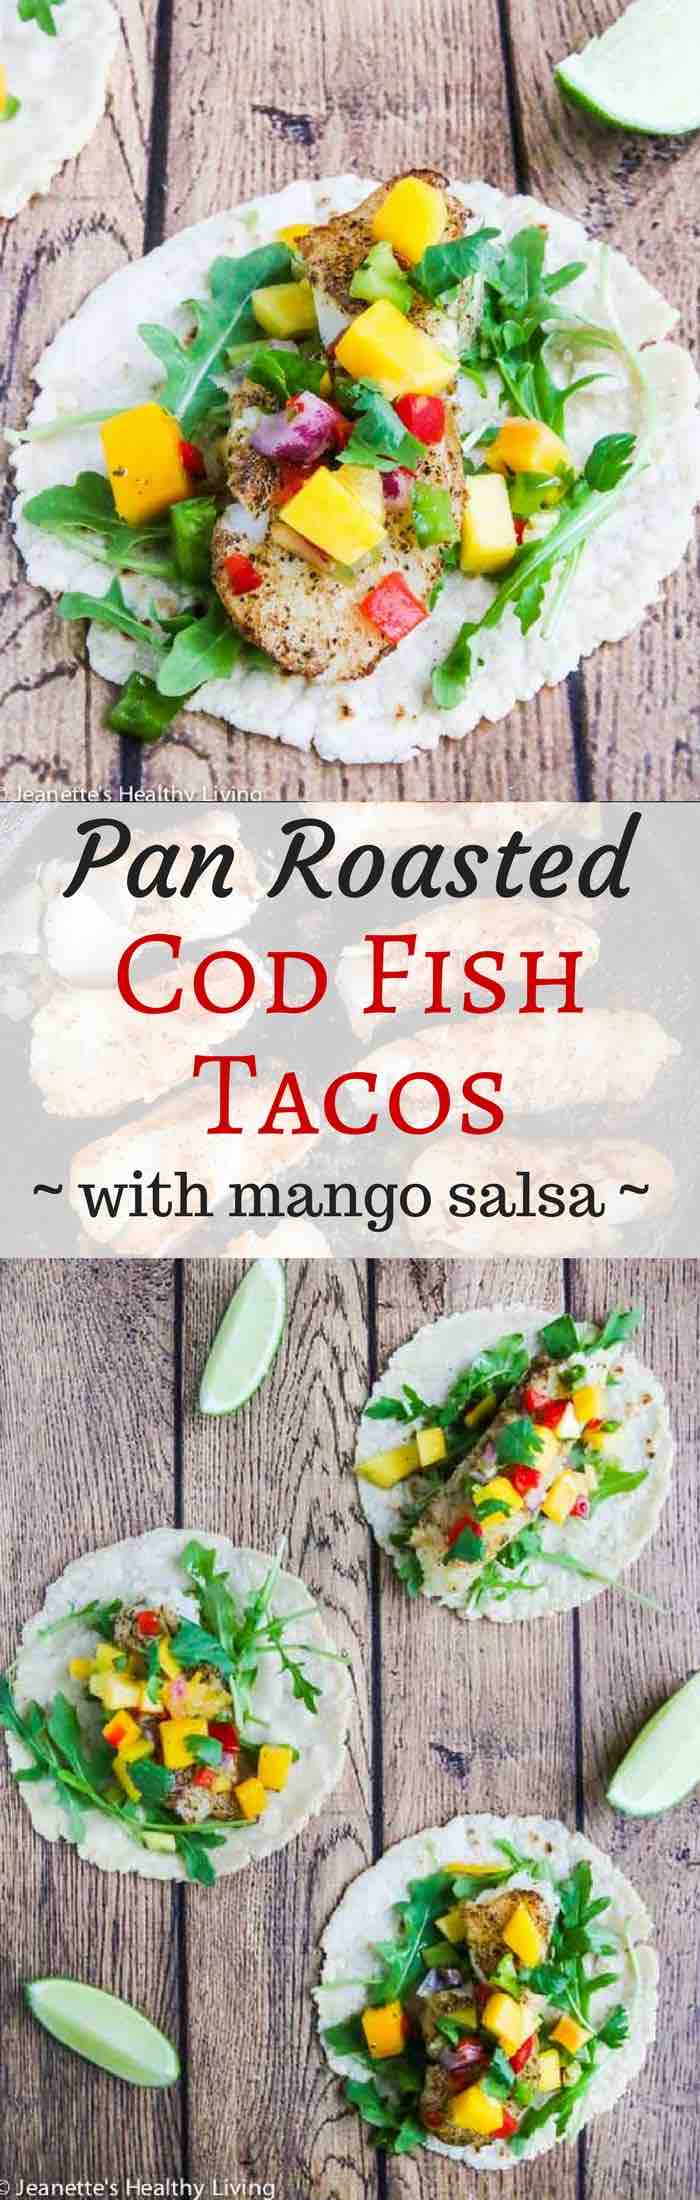 Pan Roasted Cod Fish Tacos - quick and easy to cook, this a delicious, light and healthy fish taco